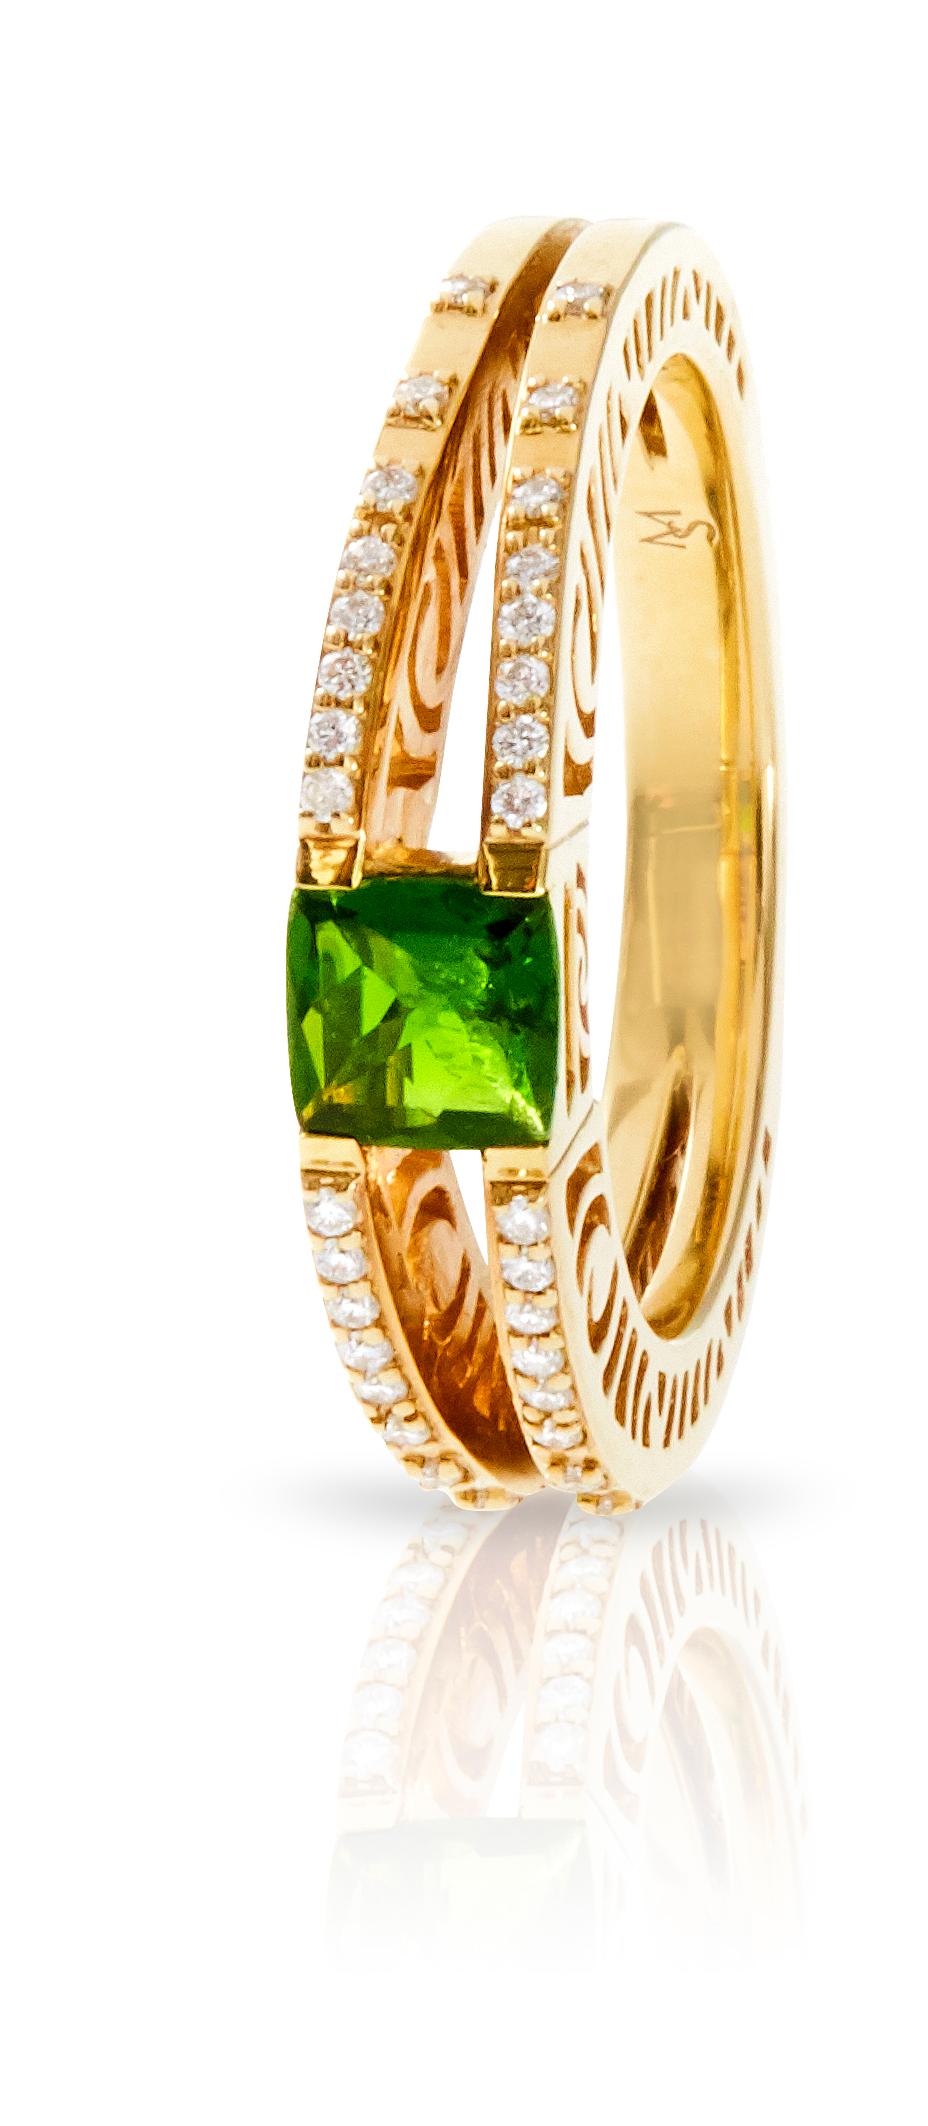 This special Shooting Stars Split Shank ring is made in 14k yellow gold. It is high polished, 5 mm wide at the top and set with a  5mm square Chrome Tourmaline and diamond melee.  The sides have the pierced, signature 